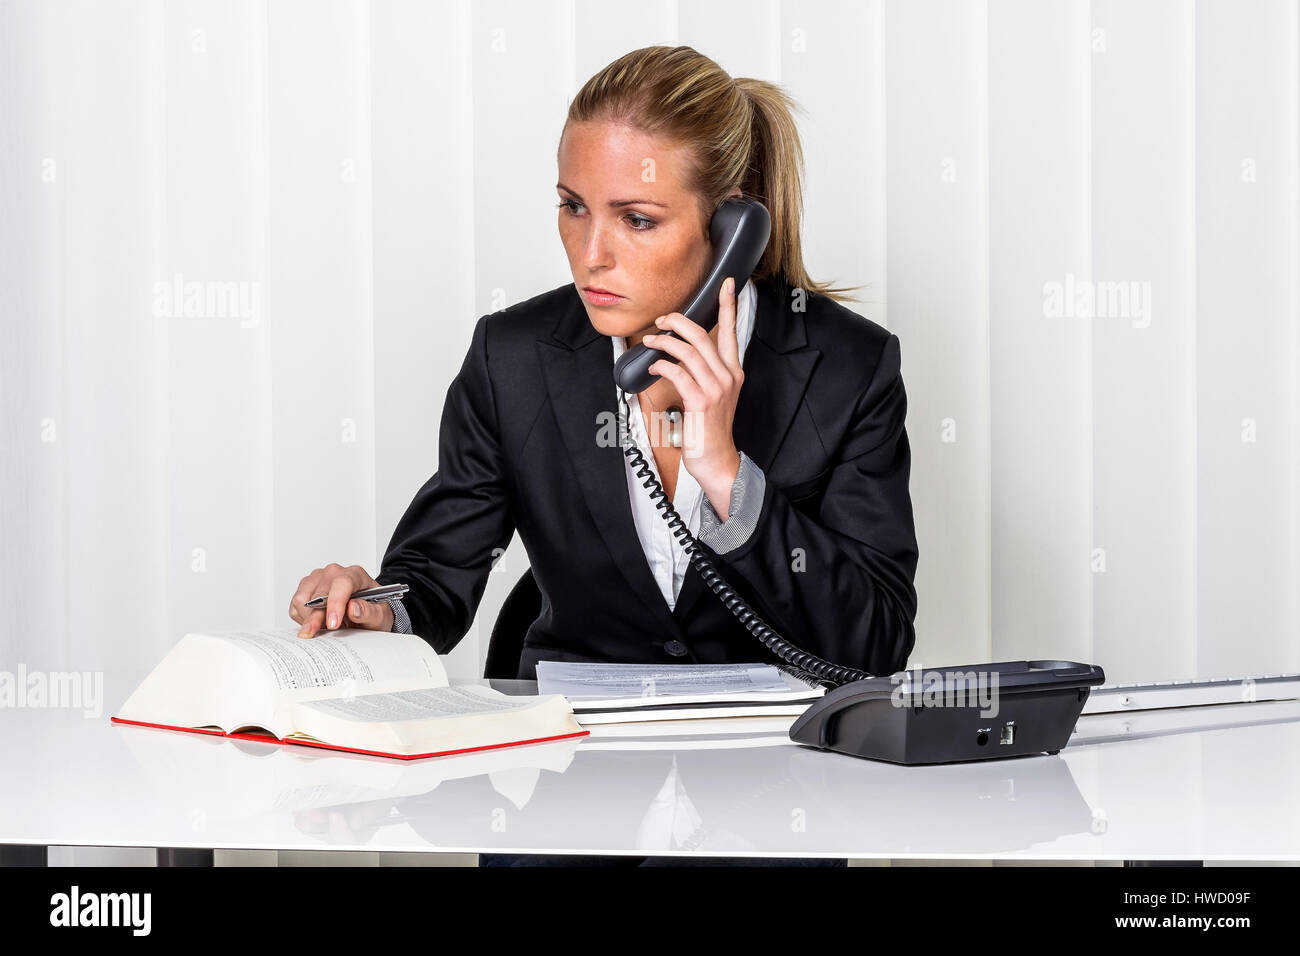 Businesswoman sits in an office. Symbolic photo for managers, independency or lawyer., Geschaeftsfrau sitzt in einem Buero. Symbolfoto fuer Manager, S Stock Photo